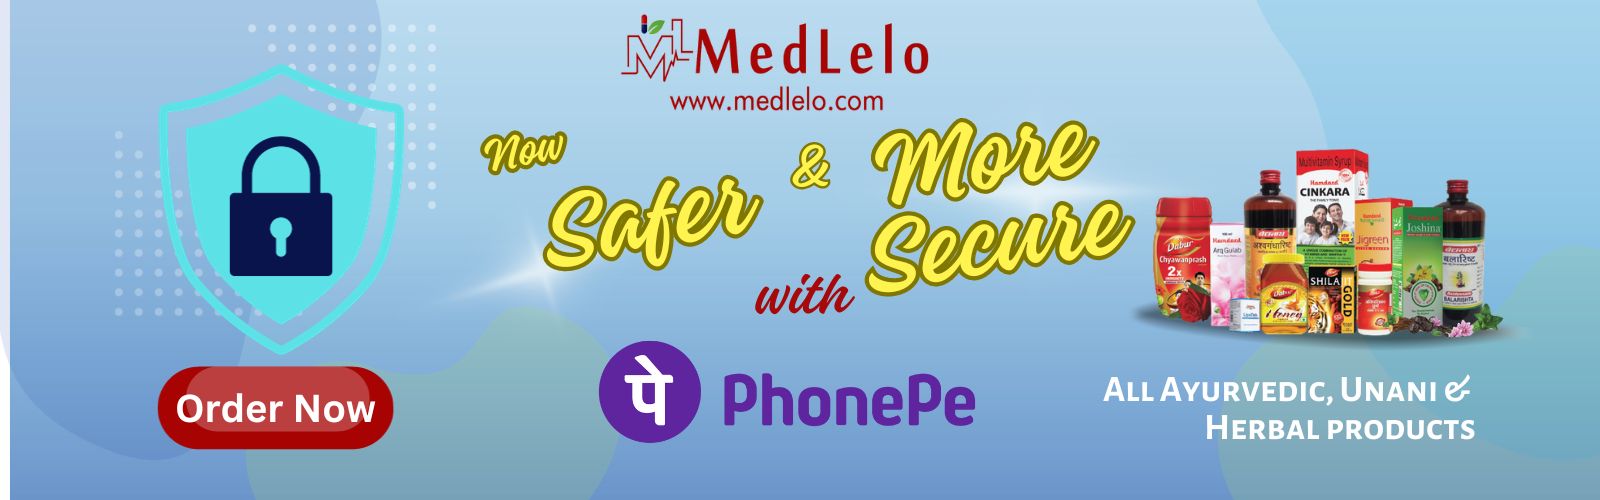 Phonepe, medlelo.com, medlelo, safer payment, secure payments, Phone pe, trust, secure, ayurvedic, herbal